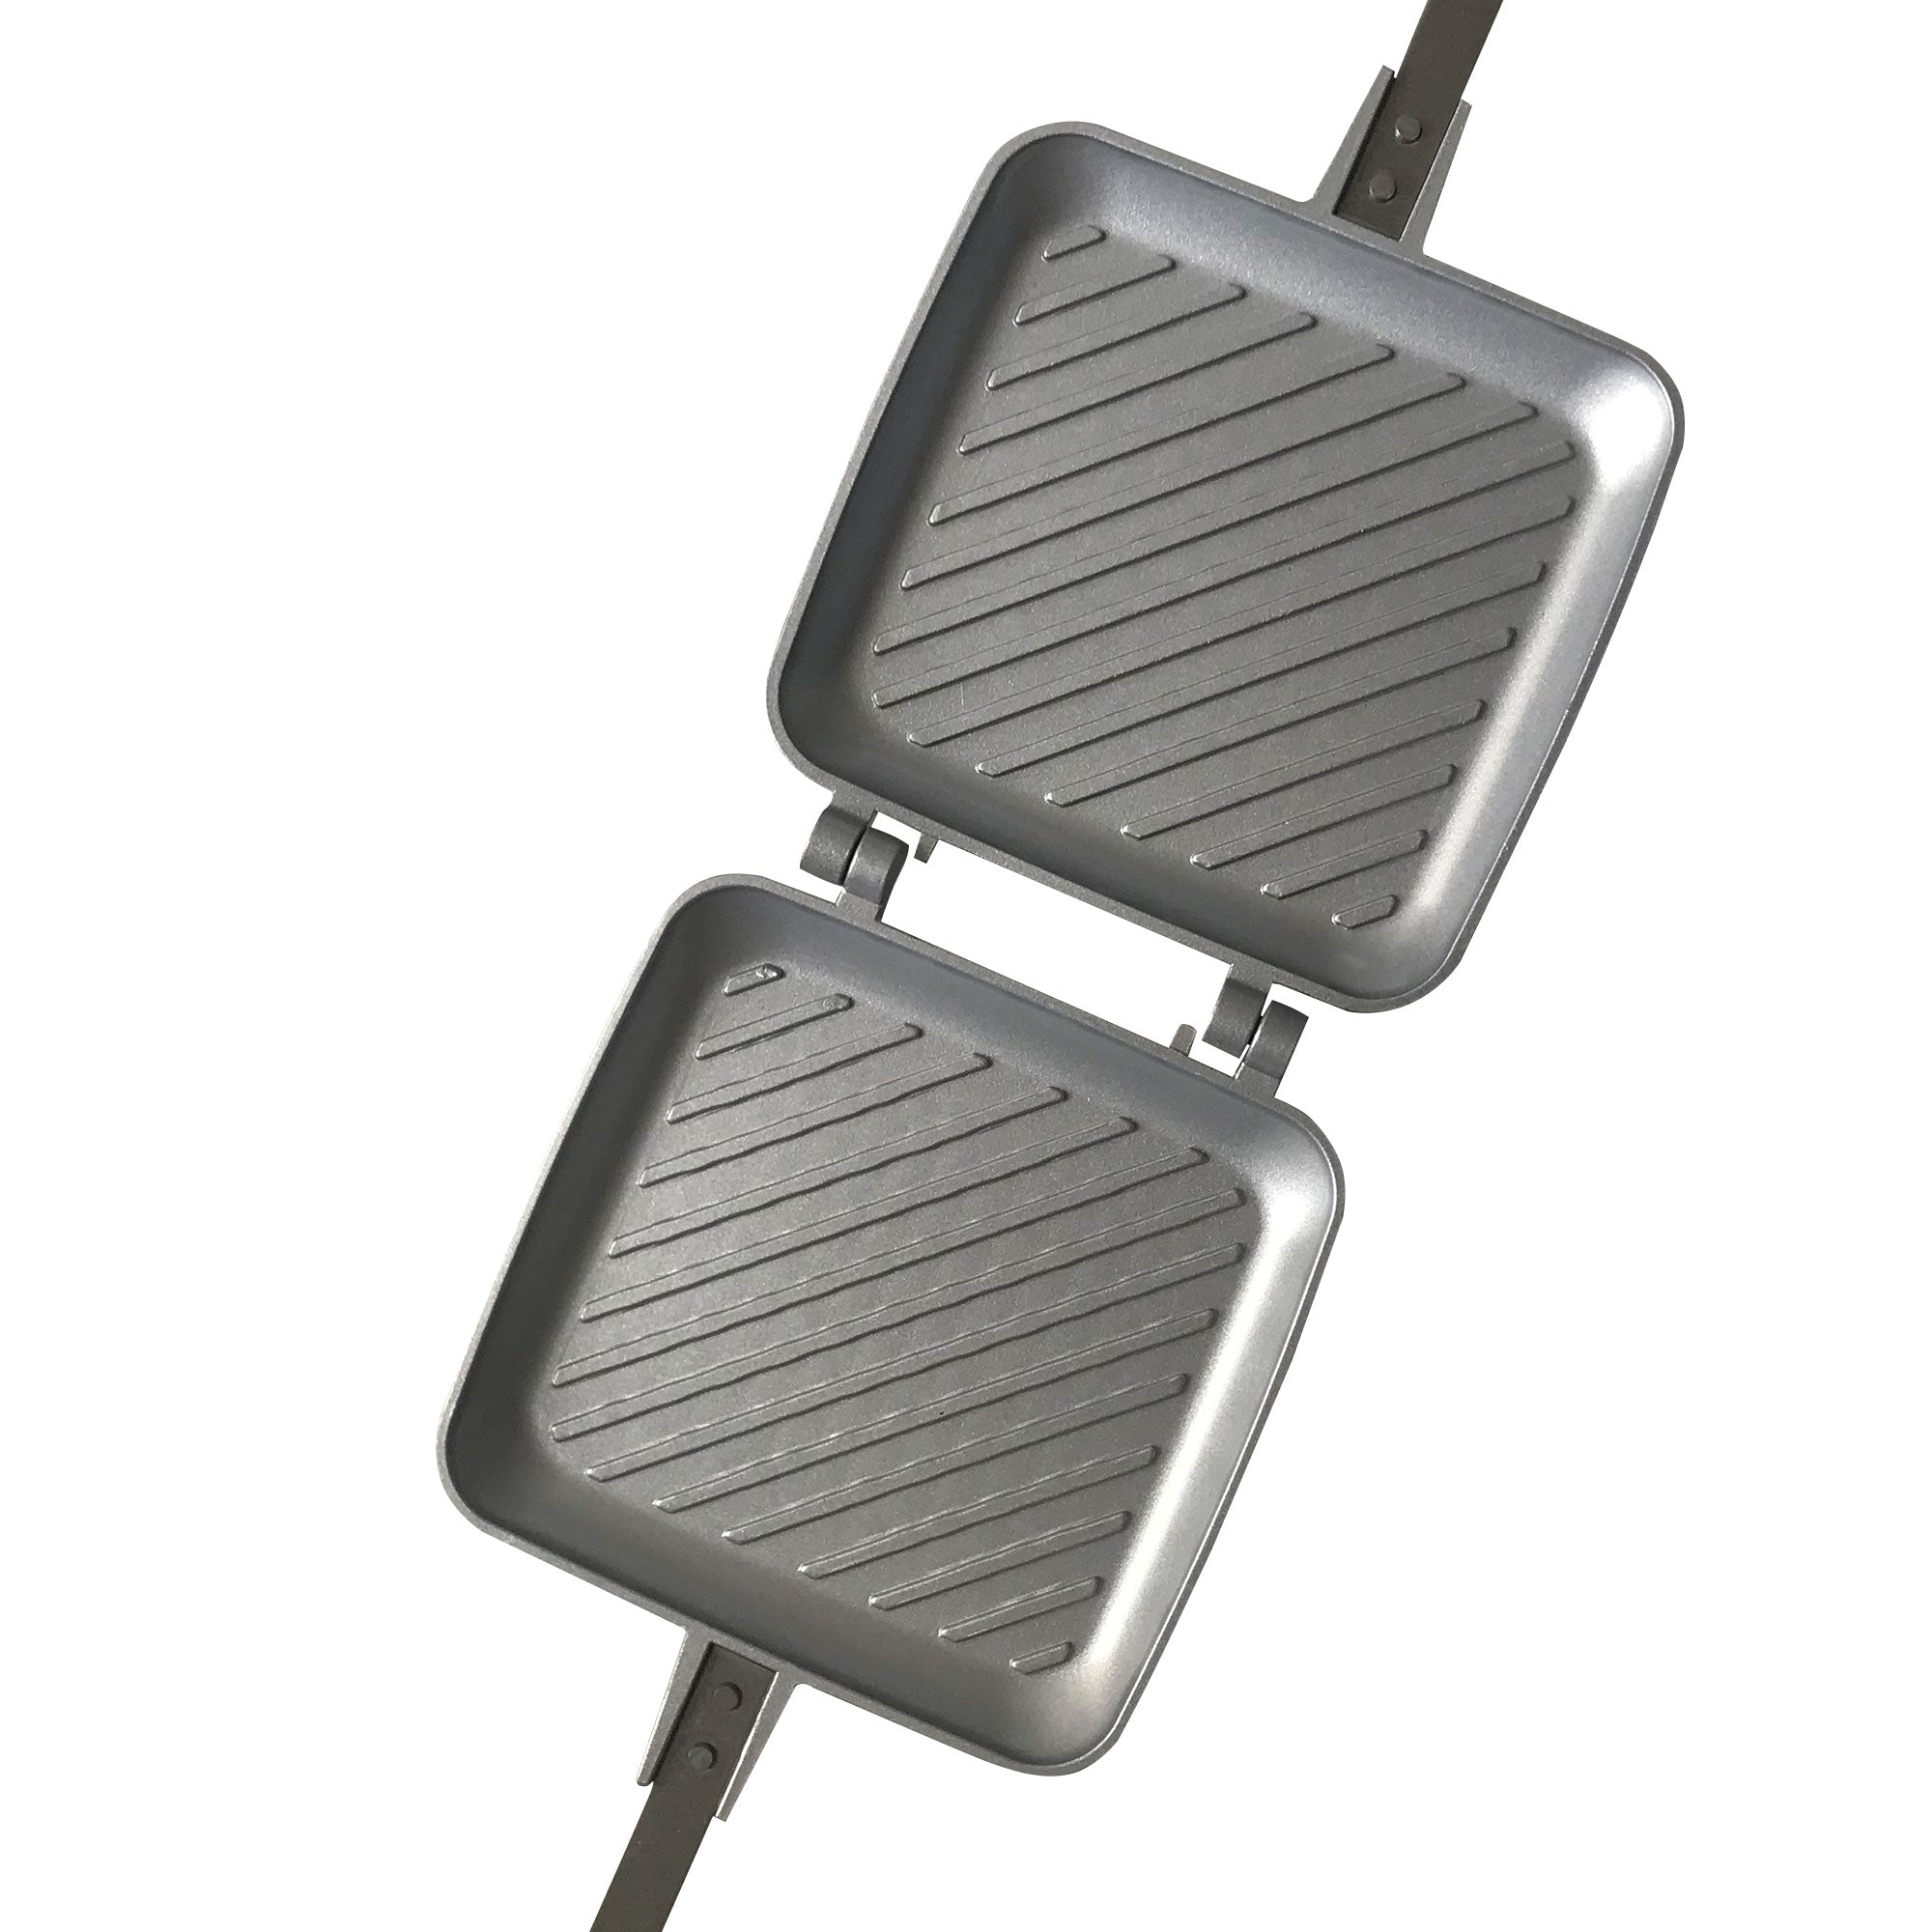 Toasted Sandwich Maker - Panini Press or Grilled Cheese Maker - Stove Top  Toastie Non-Stick Ideal for Indoors and Outdoors by Jean Patrique :  : Home & Kitchen